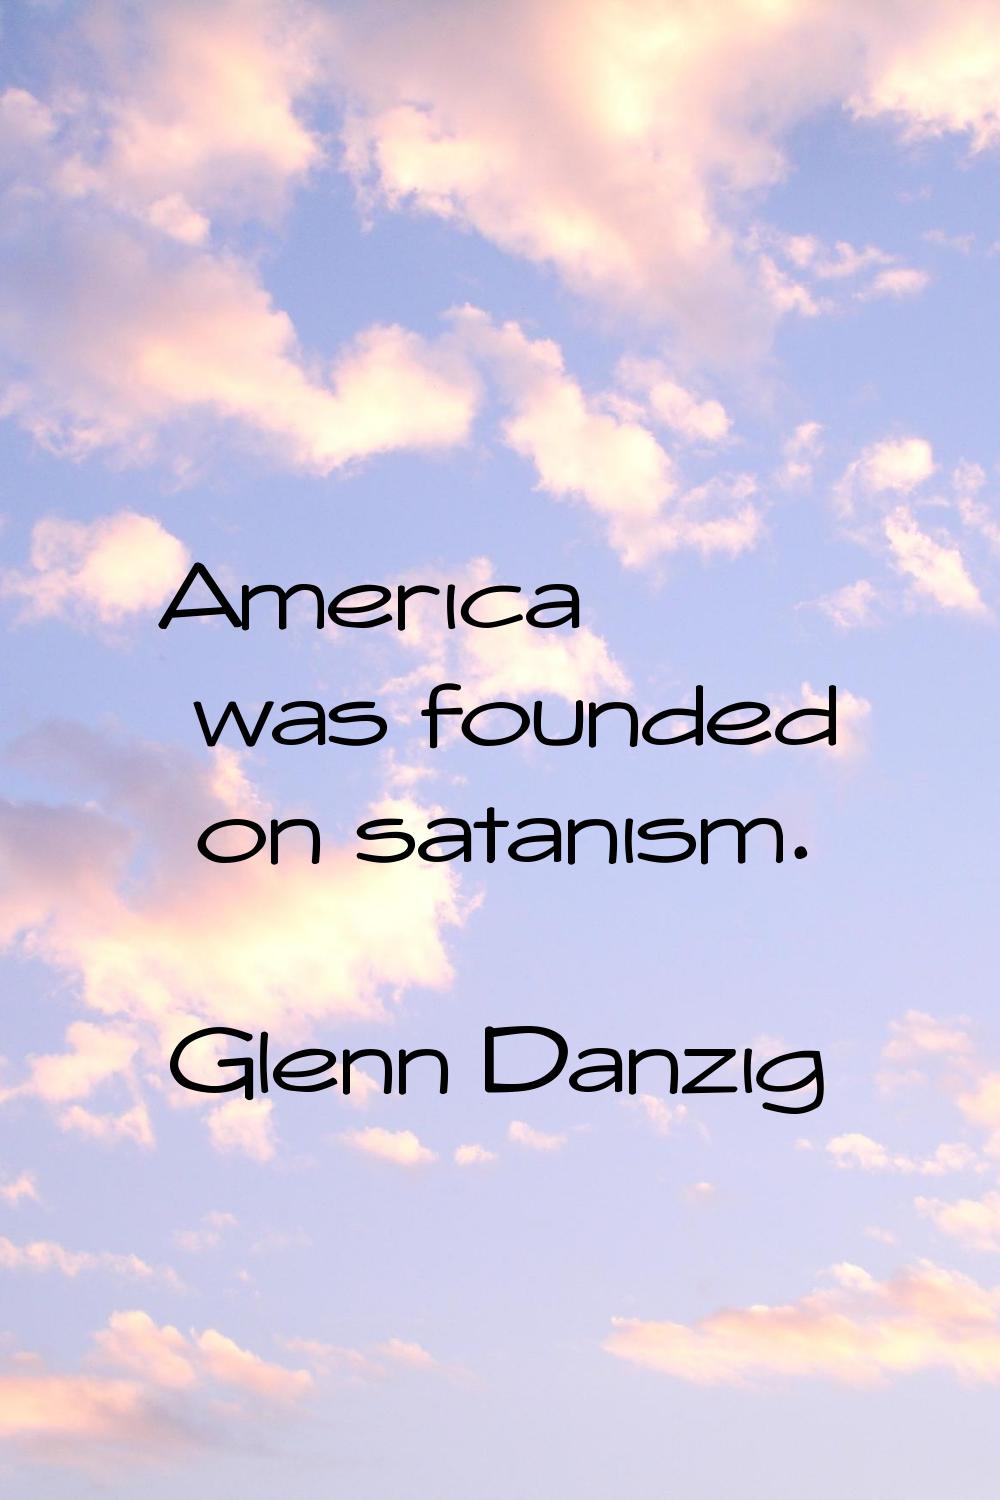 America was founded on satanism.